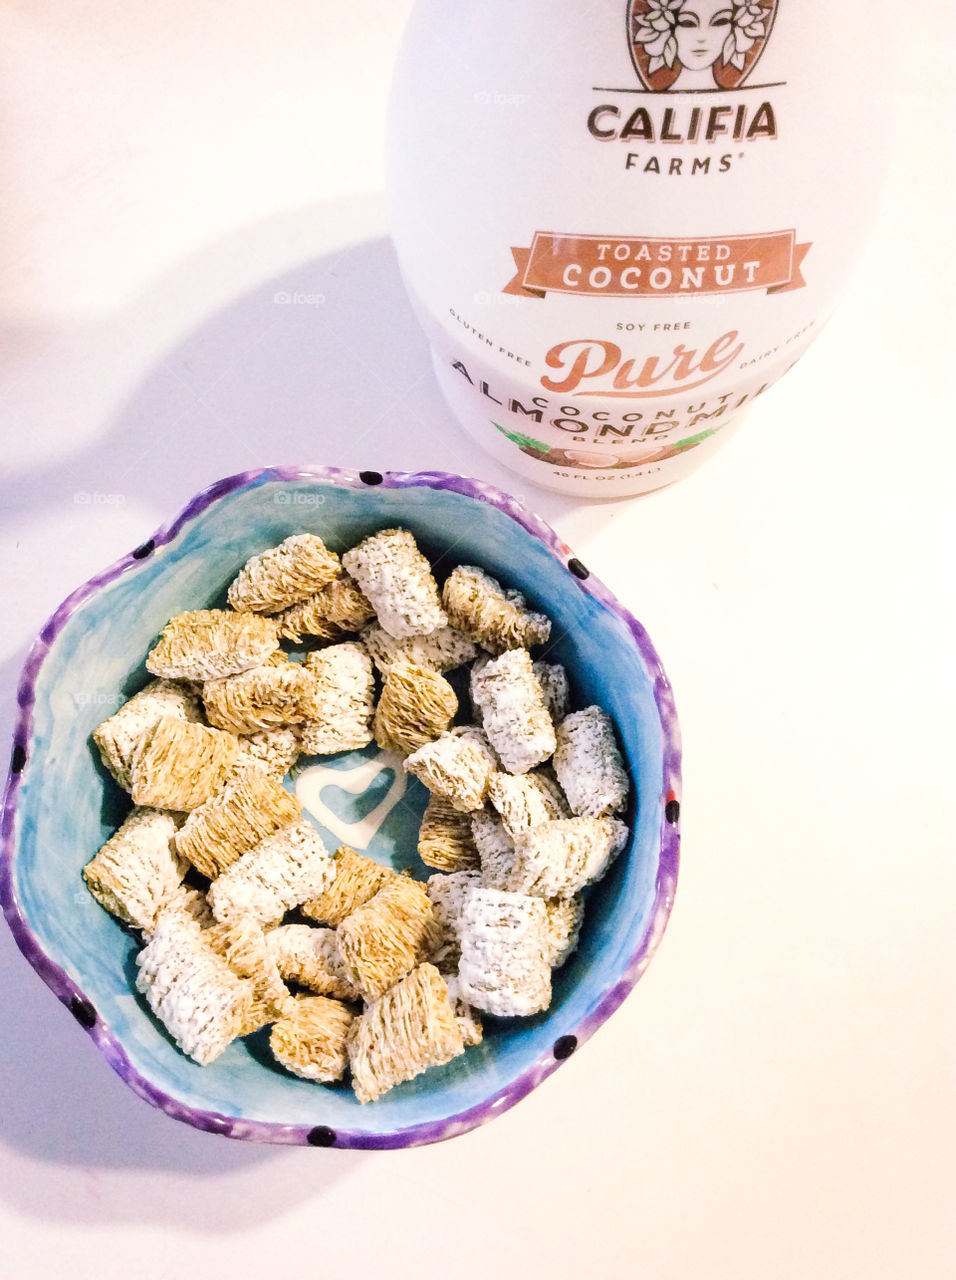 Good morning. Heart bowl cereal & coconut milk together = happy breakfast